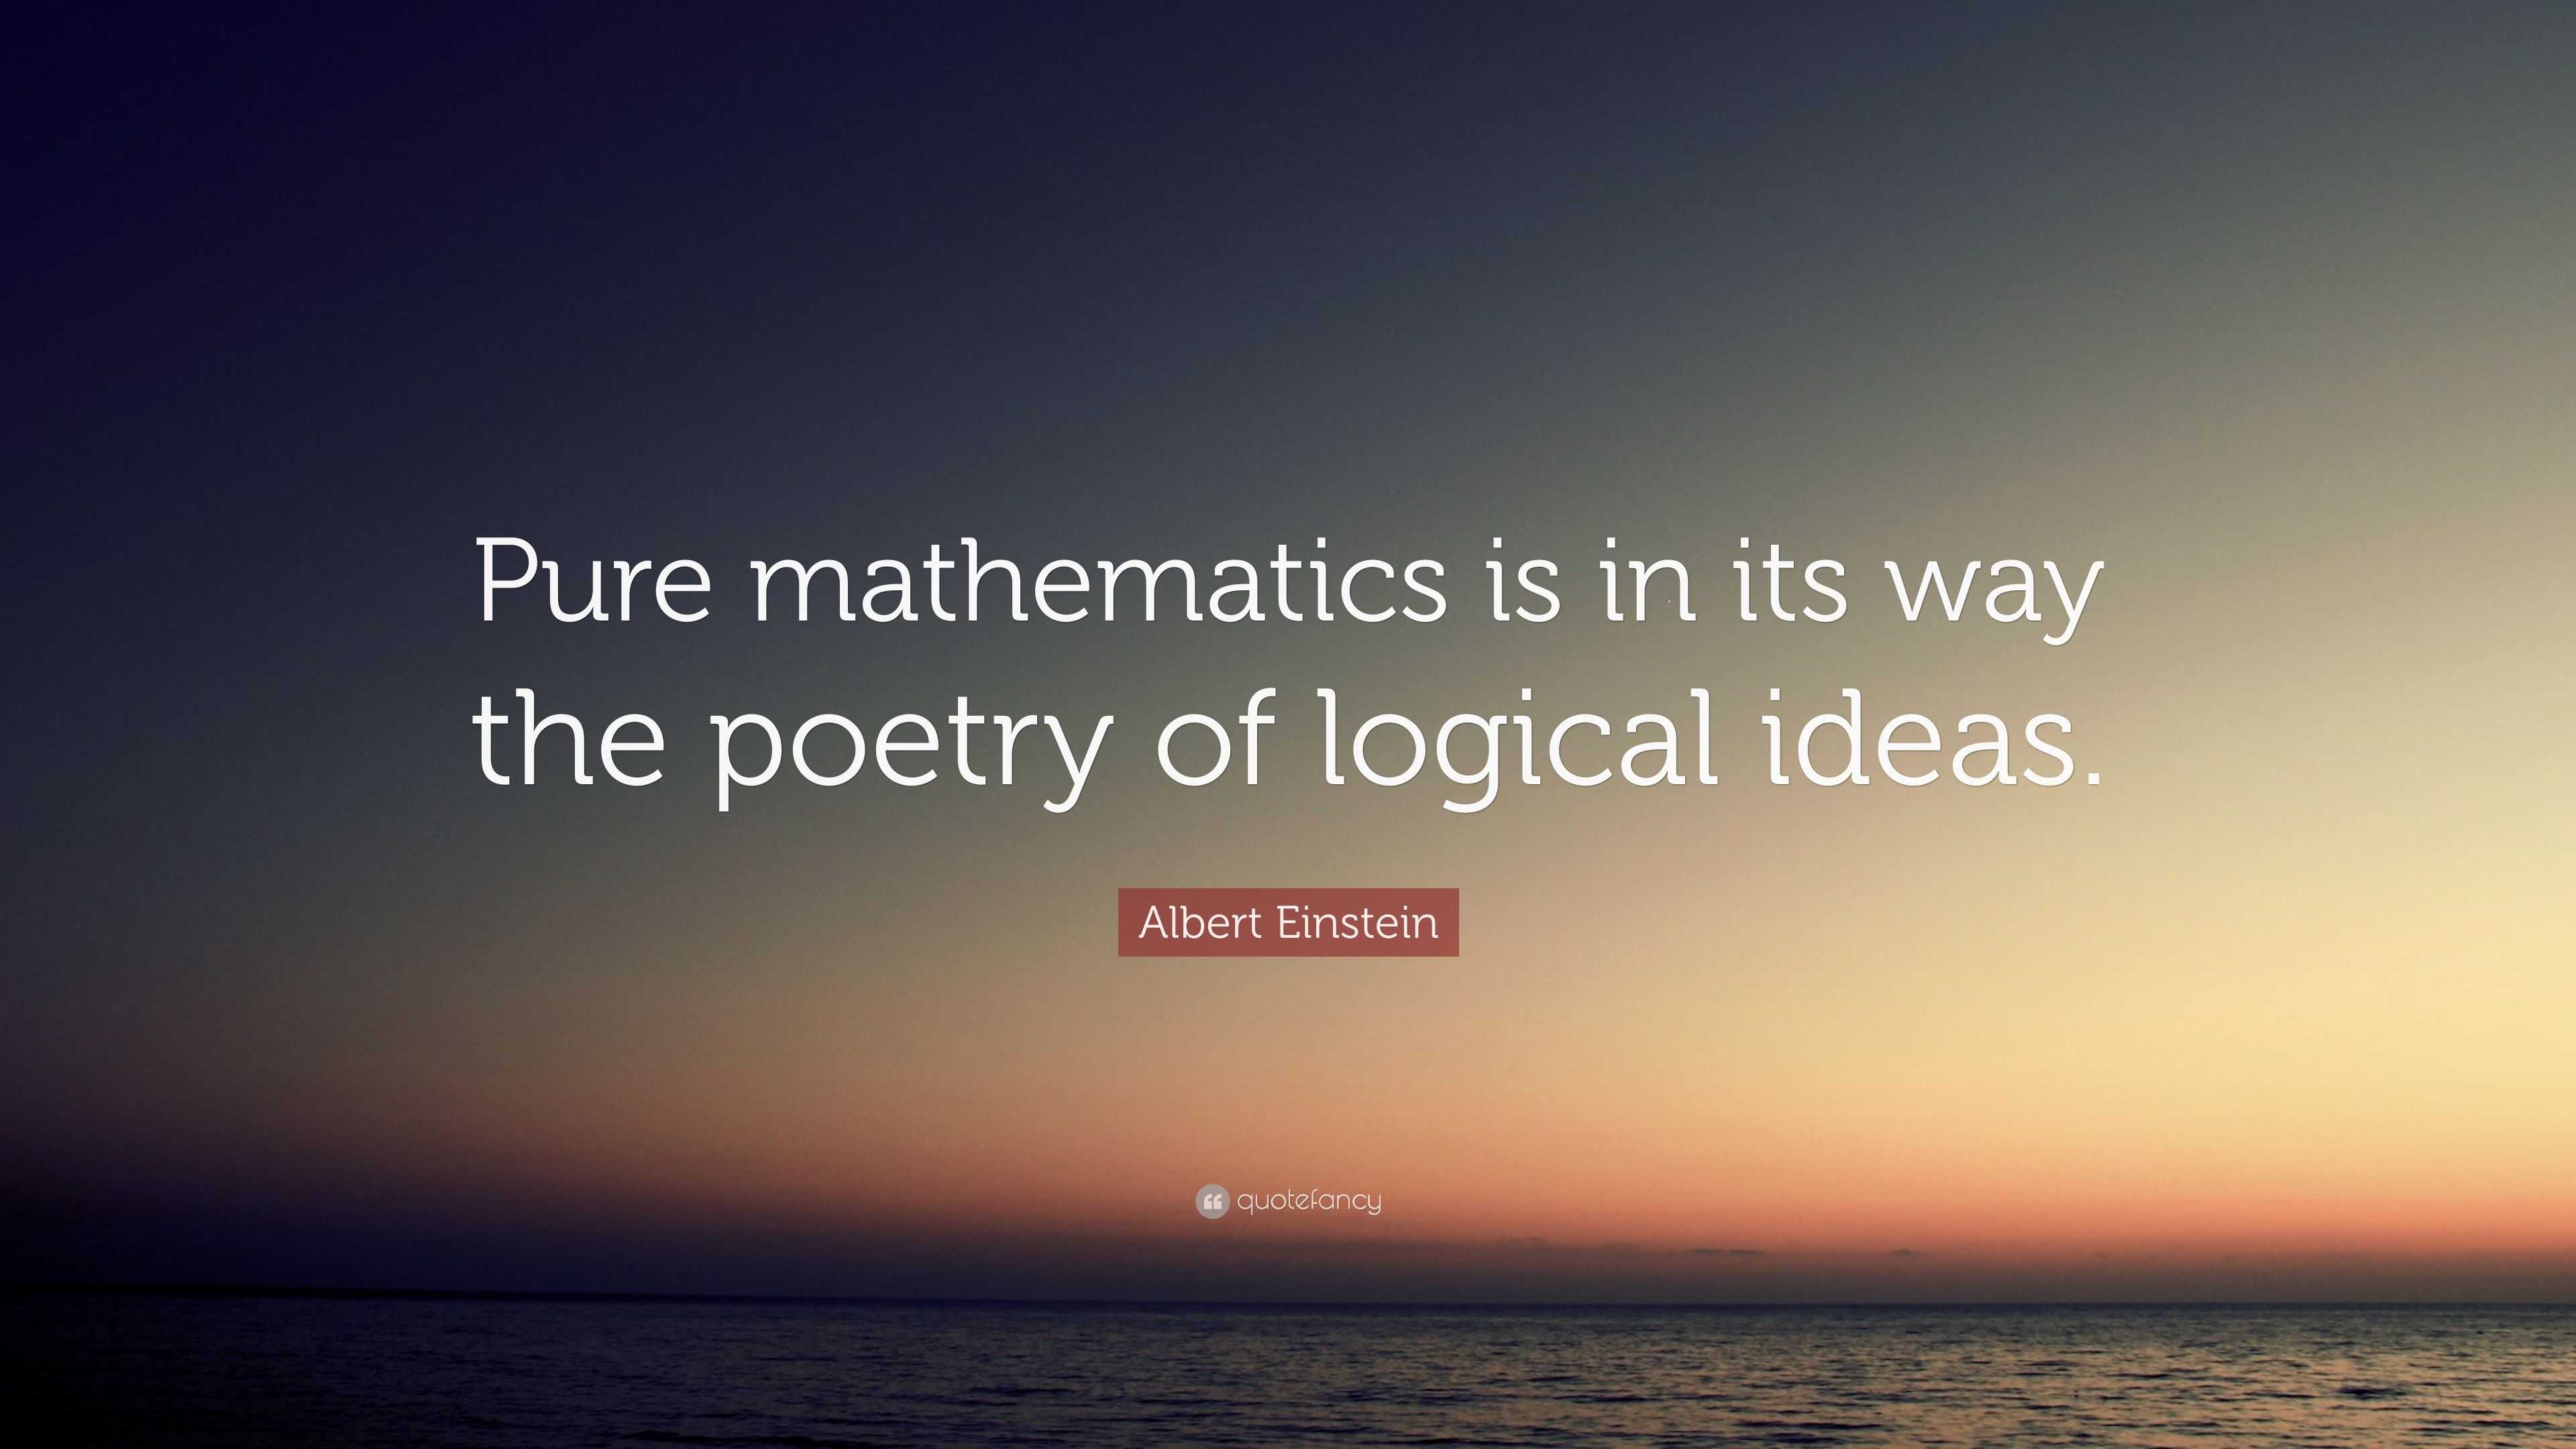 Albert Einstein Quote: “Pure mathematics is in its way the poetry of